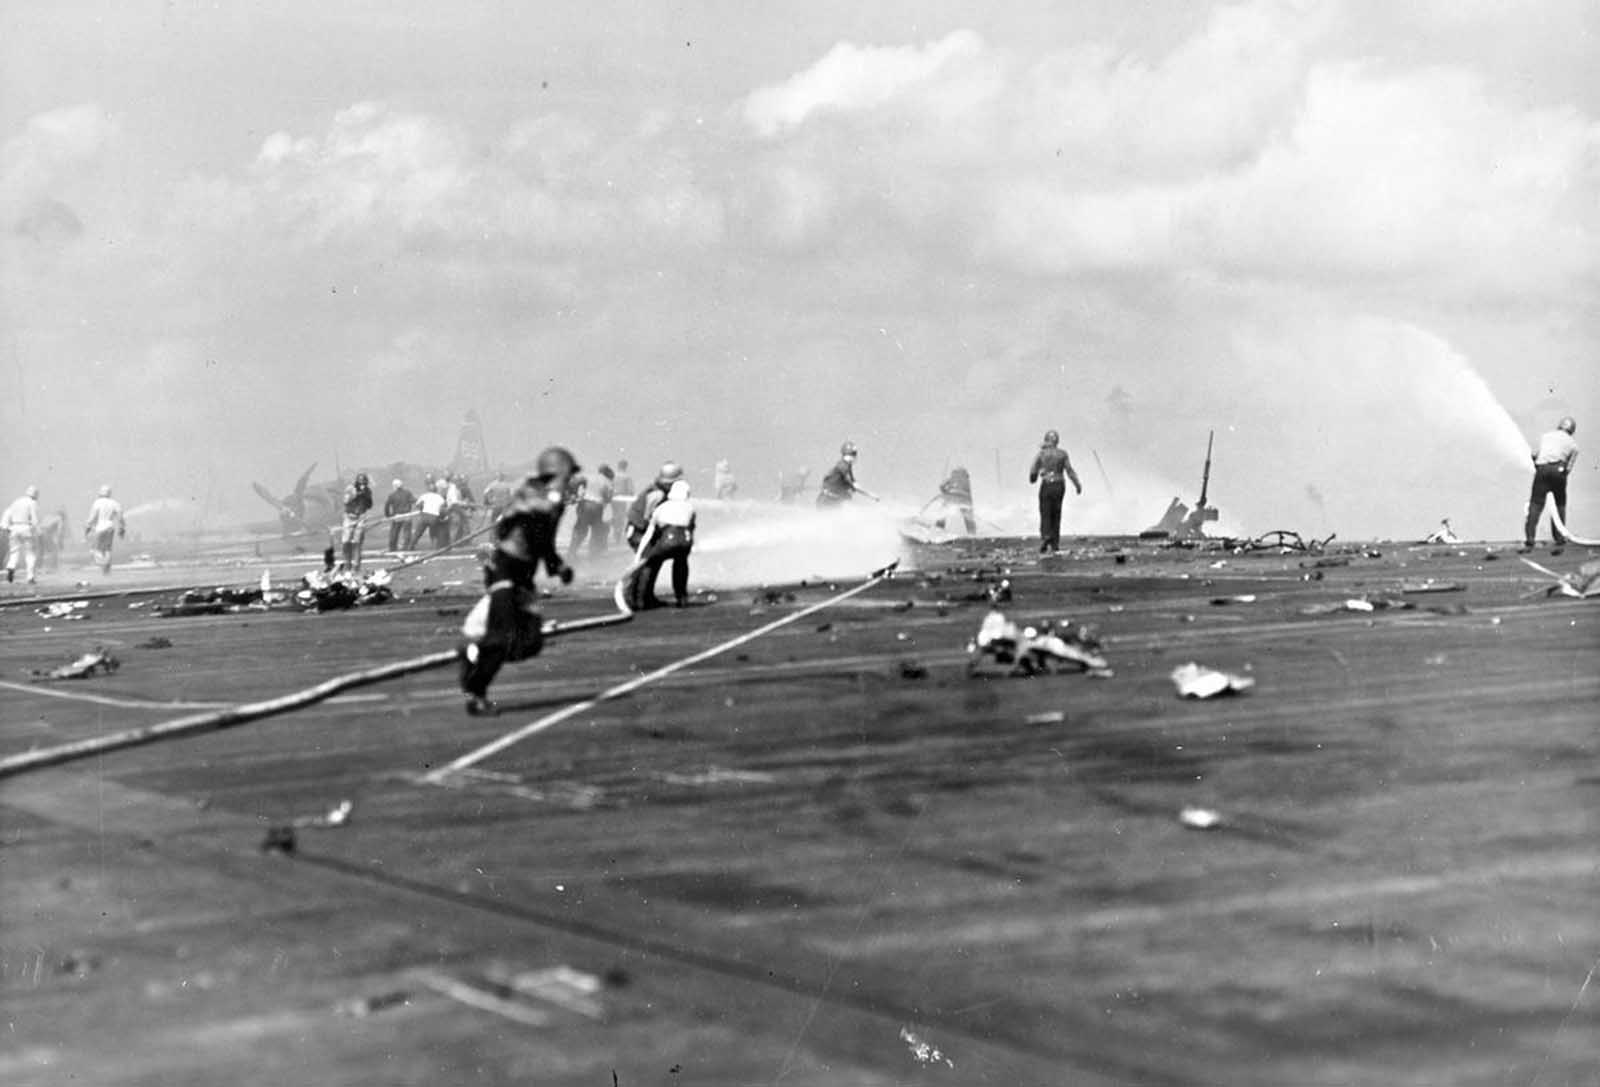 Aftermath of the November 25, 1943 kamikaze attack against the USS Essex. Fire-fighters and scattered fragments of the Japanese aircraft cover the flight deck. The plane struck the port edge of the flight deck, landing among planes fueled for takeoff, causing extensive damage, killing 15, and wounding 44.